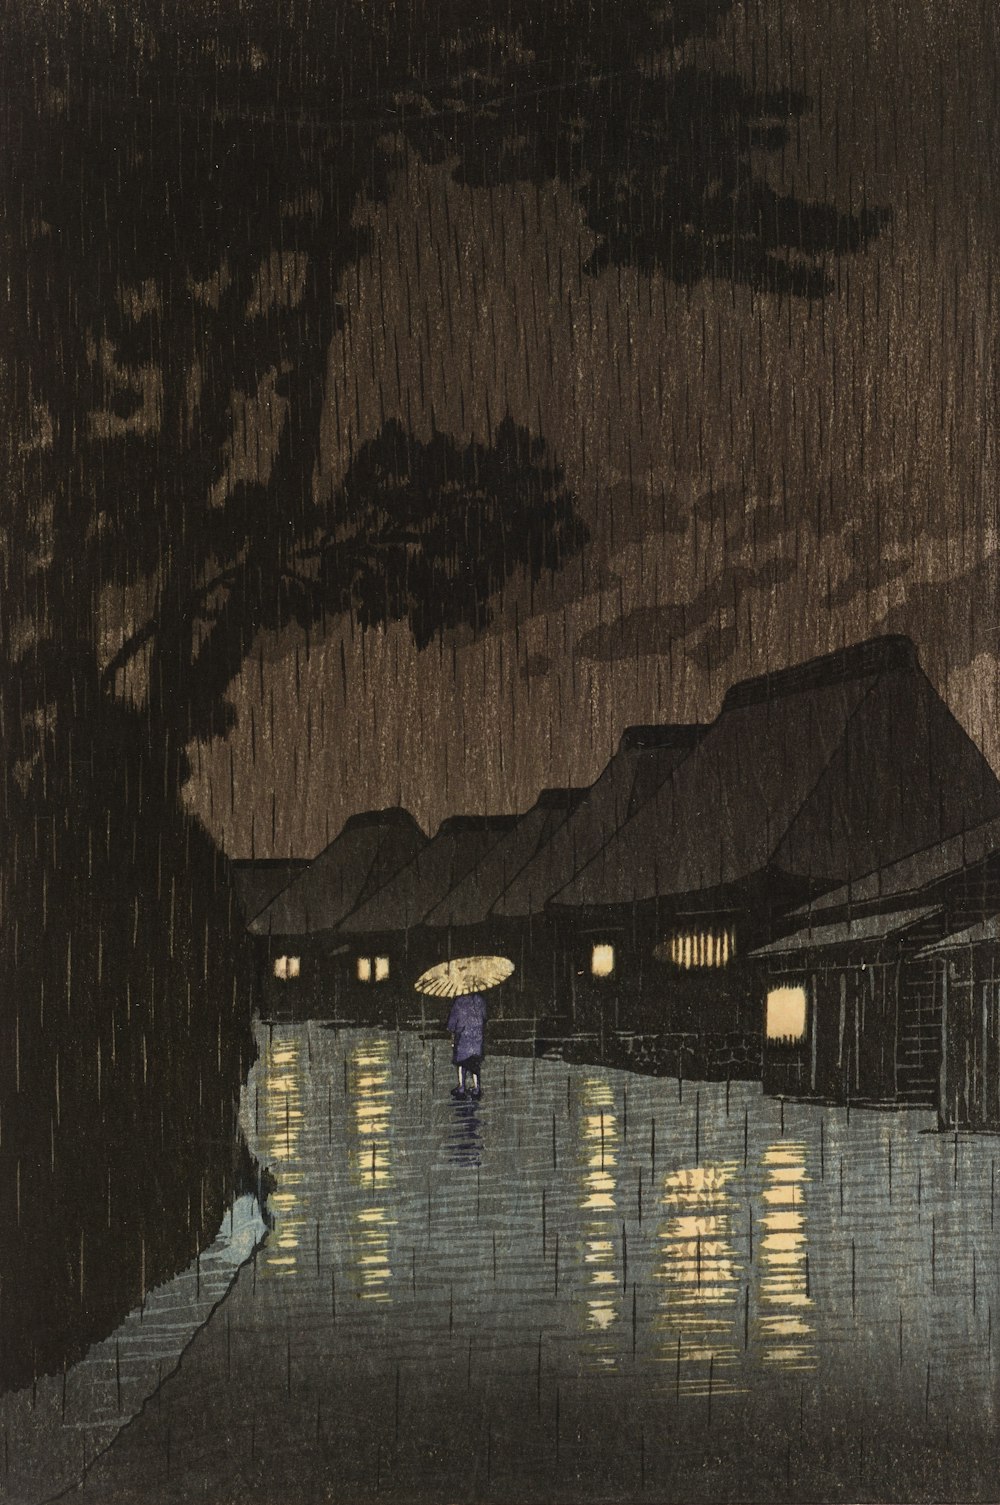 a painting of a person walking in the rain